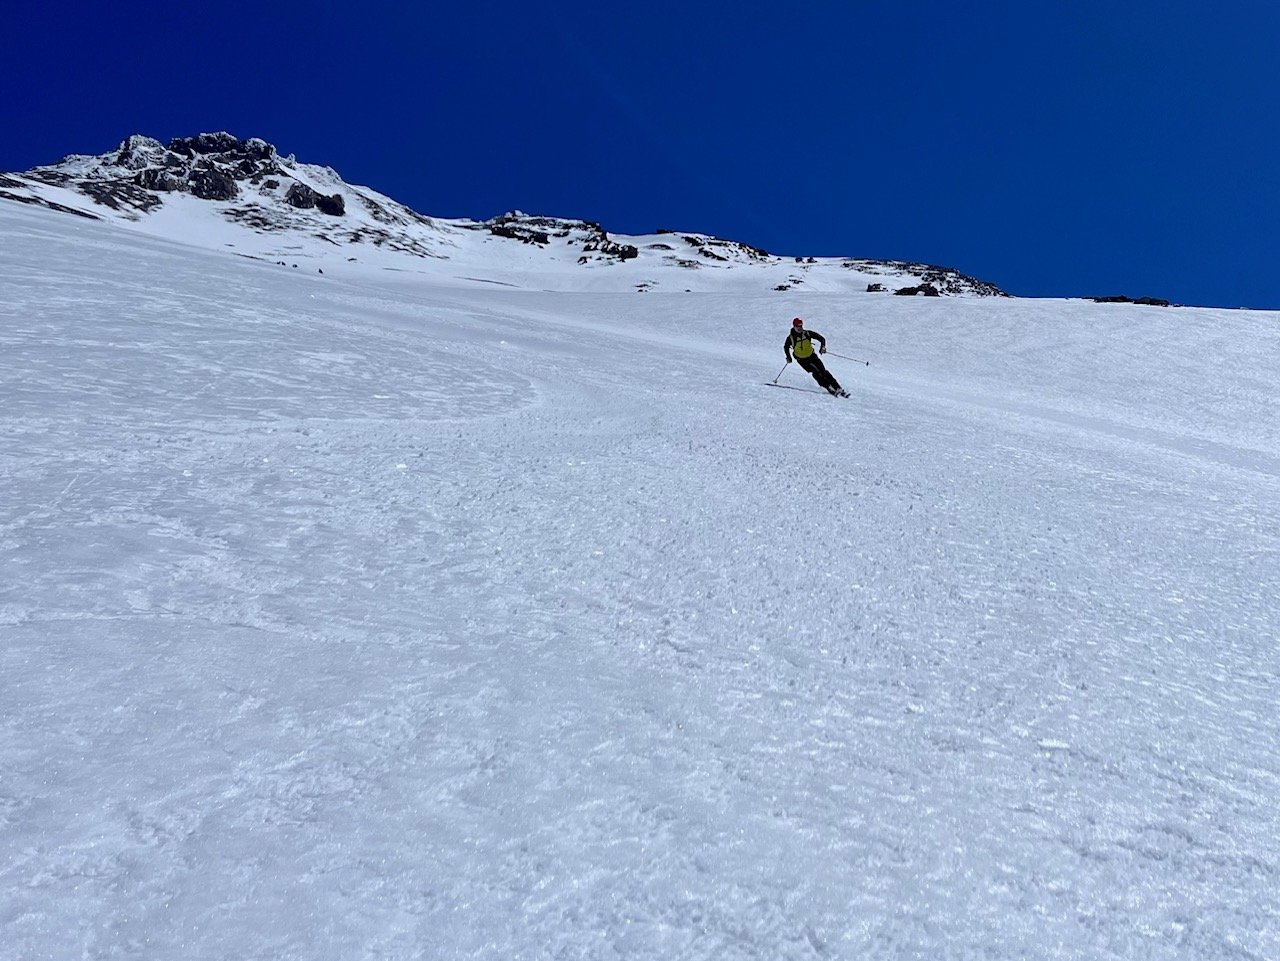 Skier makes beautiful turns down the slopes of mt shasta